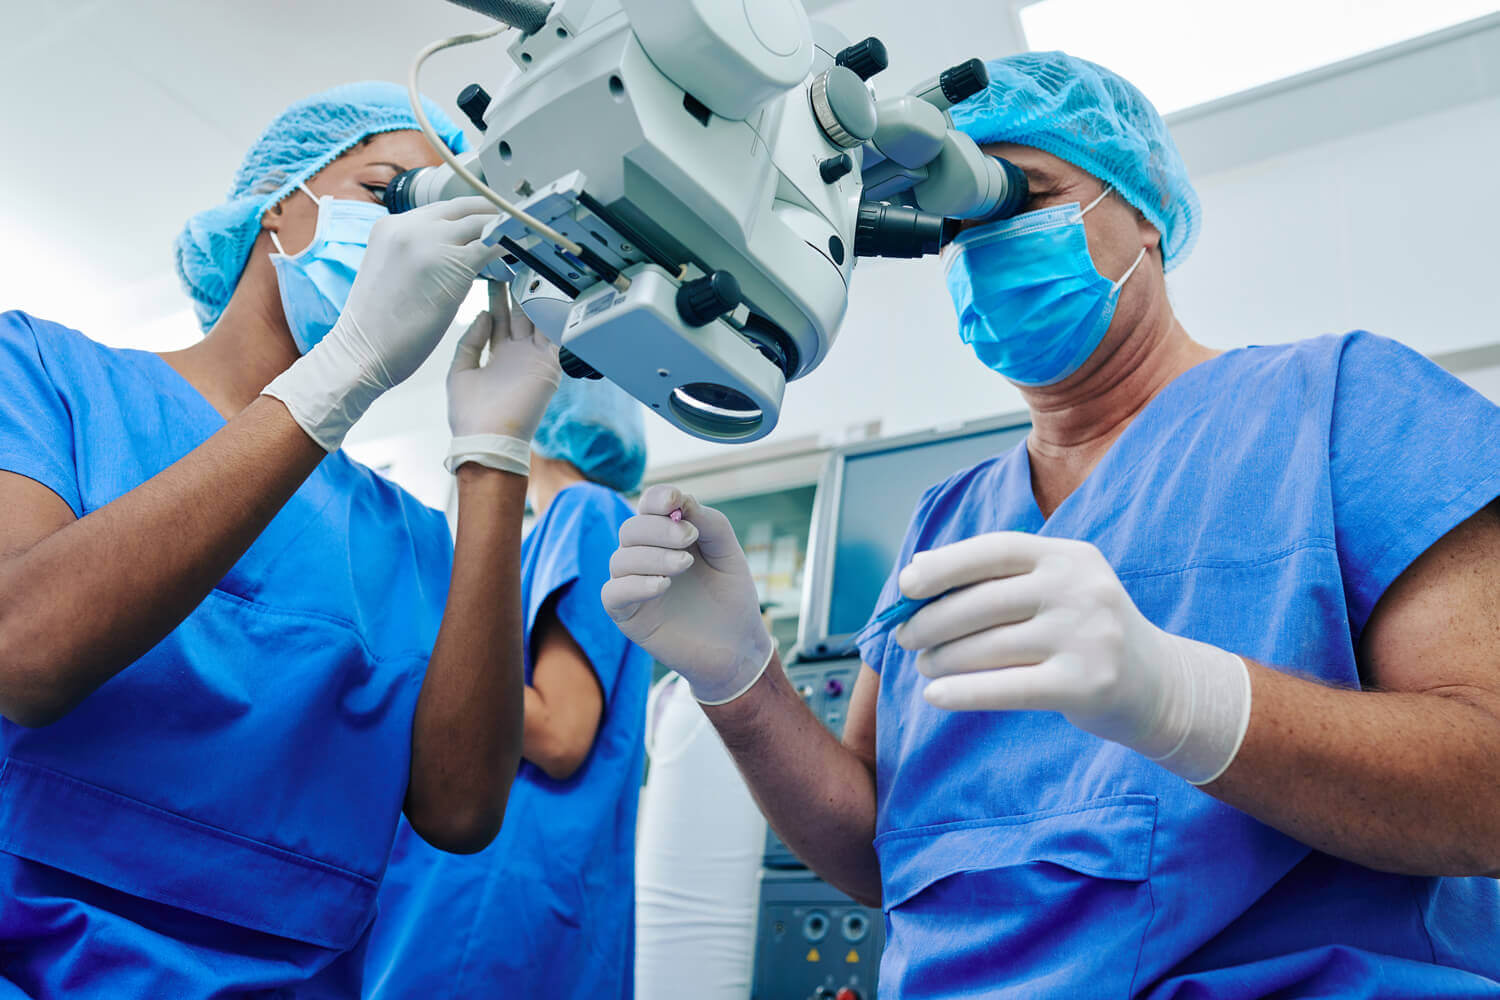 Know the risks involved in laser eye surgery